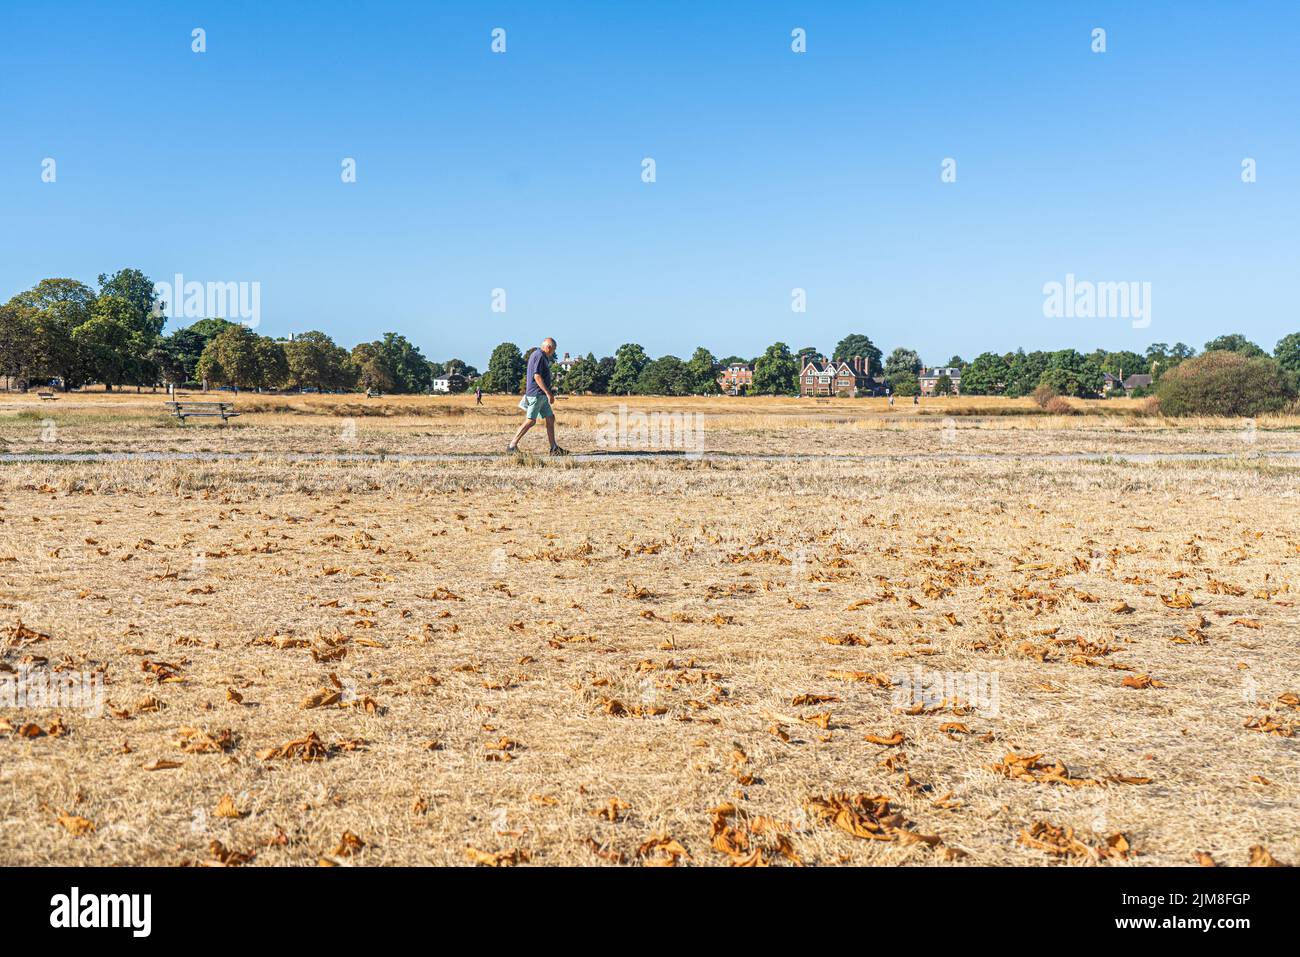 Wimbledon, London, UK. 5 August 2022 A  member of the public  walks  through a parched on Wimbledon Common south-west London this morning as the dry weather continues to affect London. Thames water has said that millions of people in the south east of England are facing hosepipe and sprinkler bans as the biggest water supplier, said its reservoirs, rivers  were lower than usual for the time of year due to the long spell of hot weather and the driest July on record in 100 years Credit. amer ghazzal/Alamy Live News Stock Photo